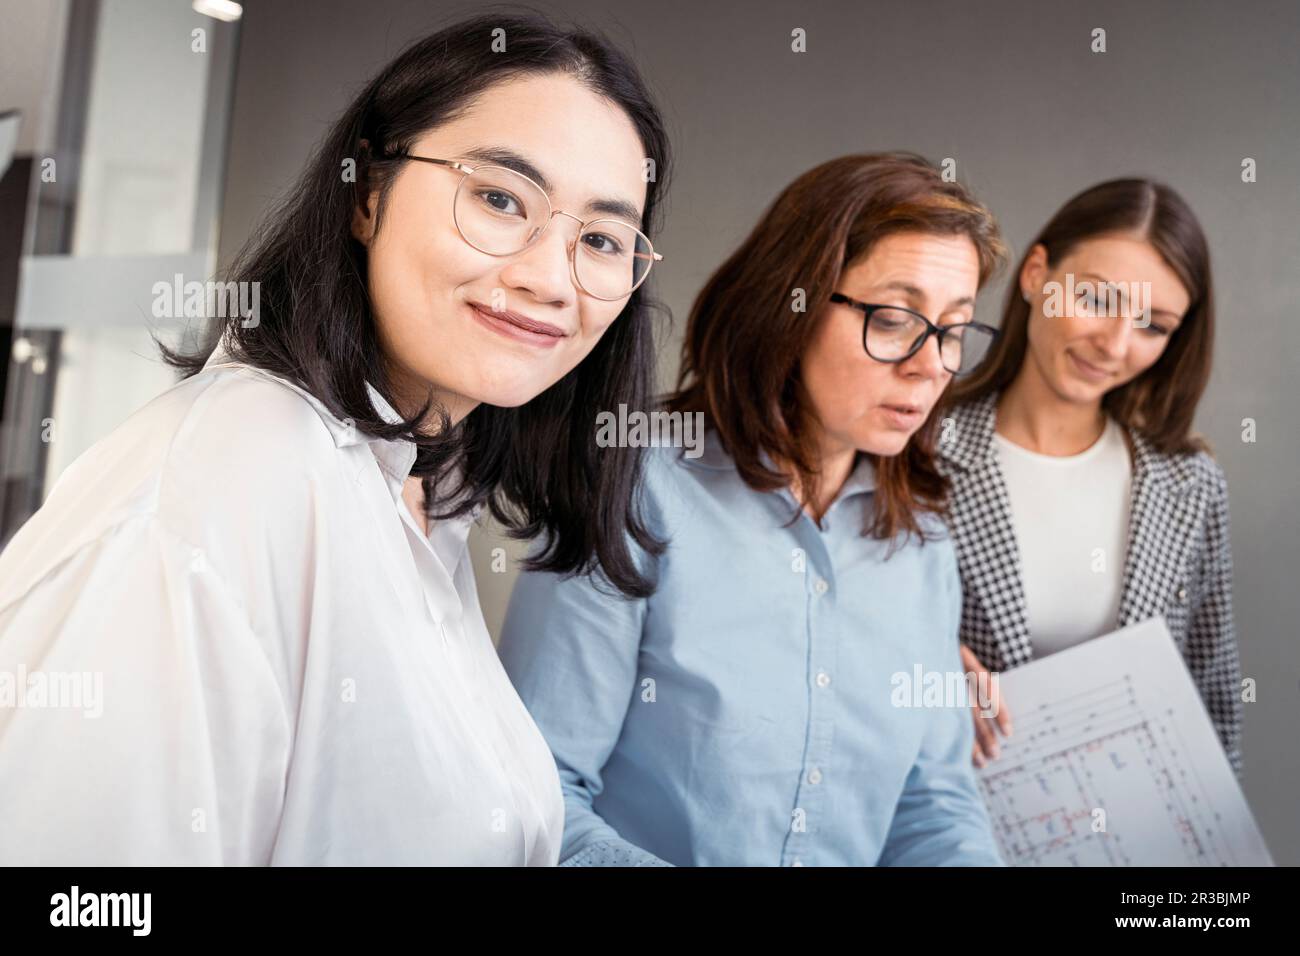 Smiling businesswoman working with colleagues on an architectural project Stock Photo